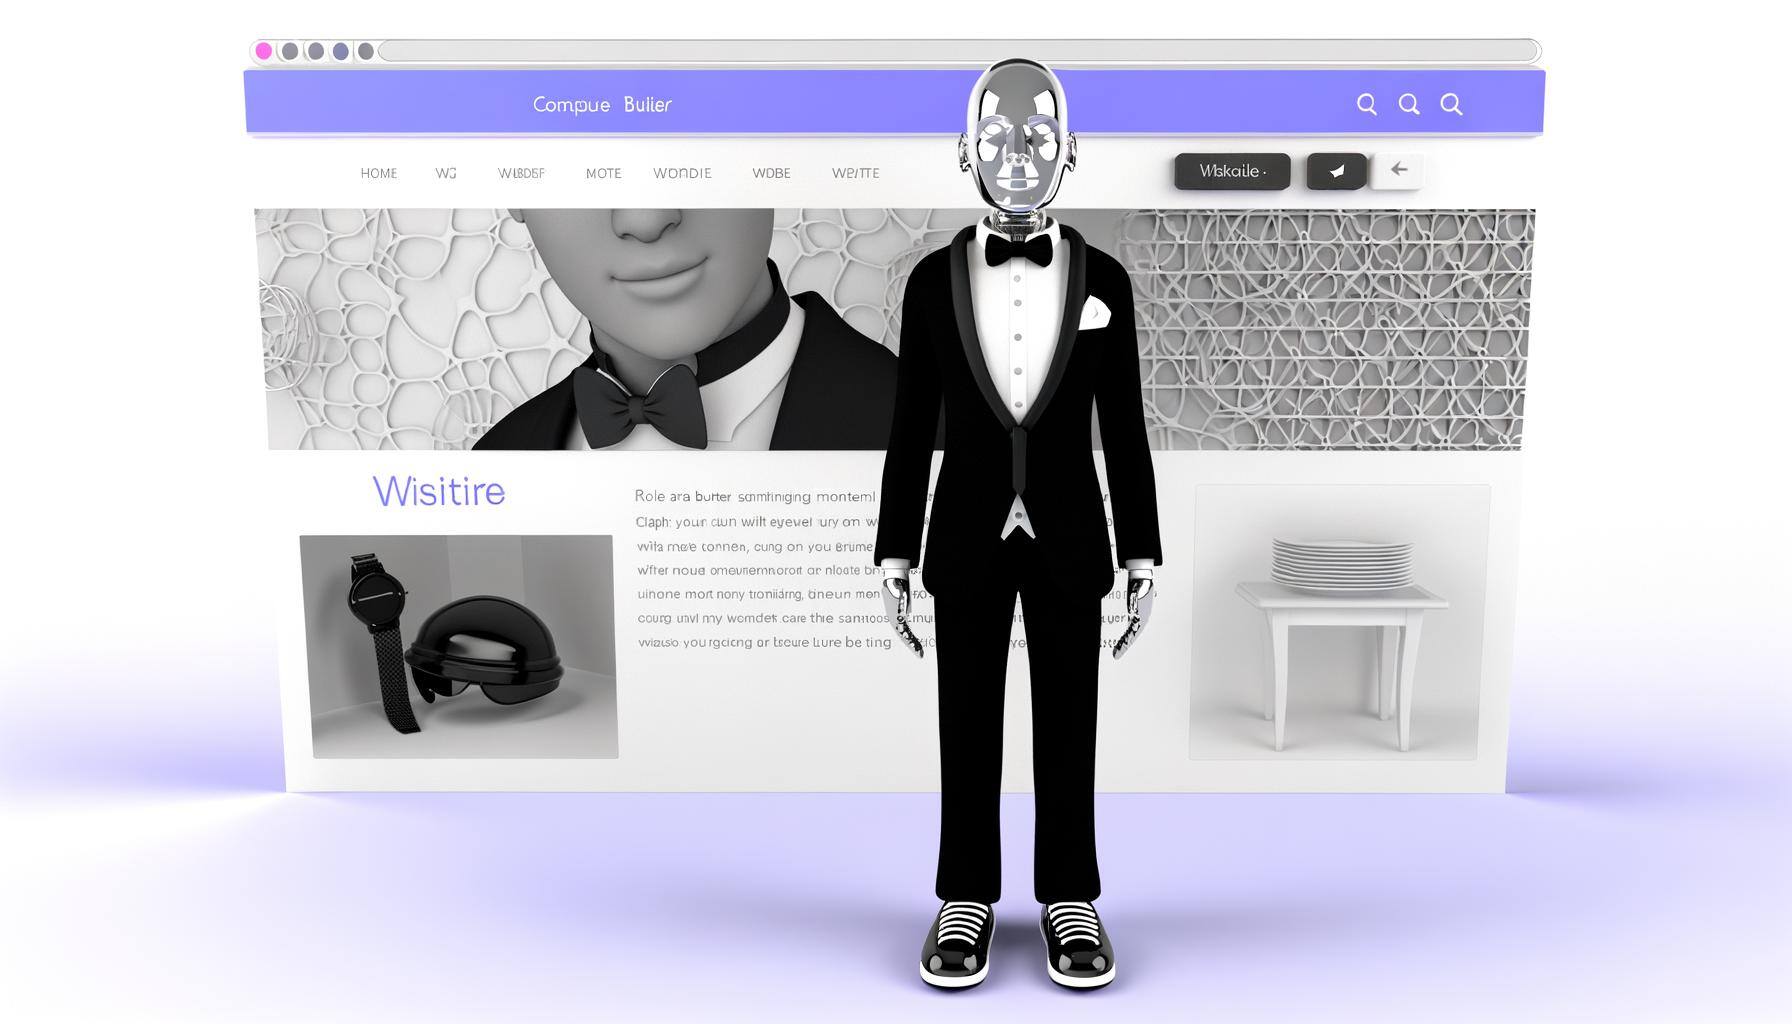 An digital butler that welcomes you to your webiste